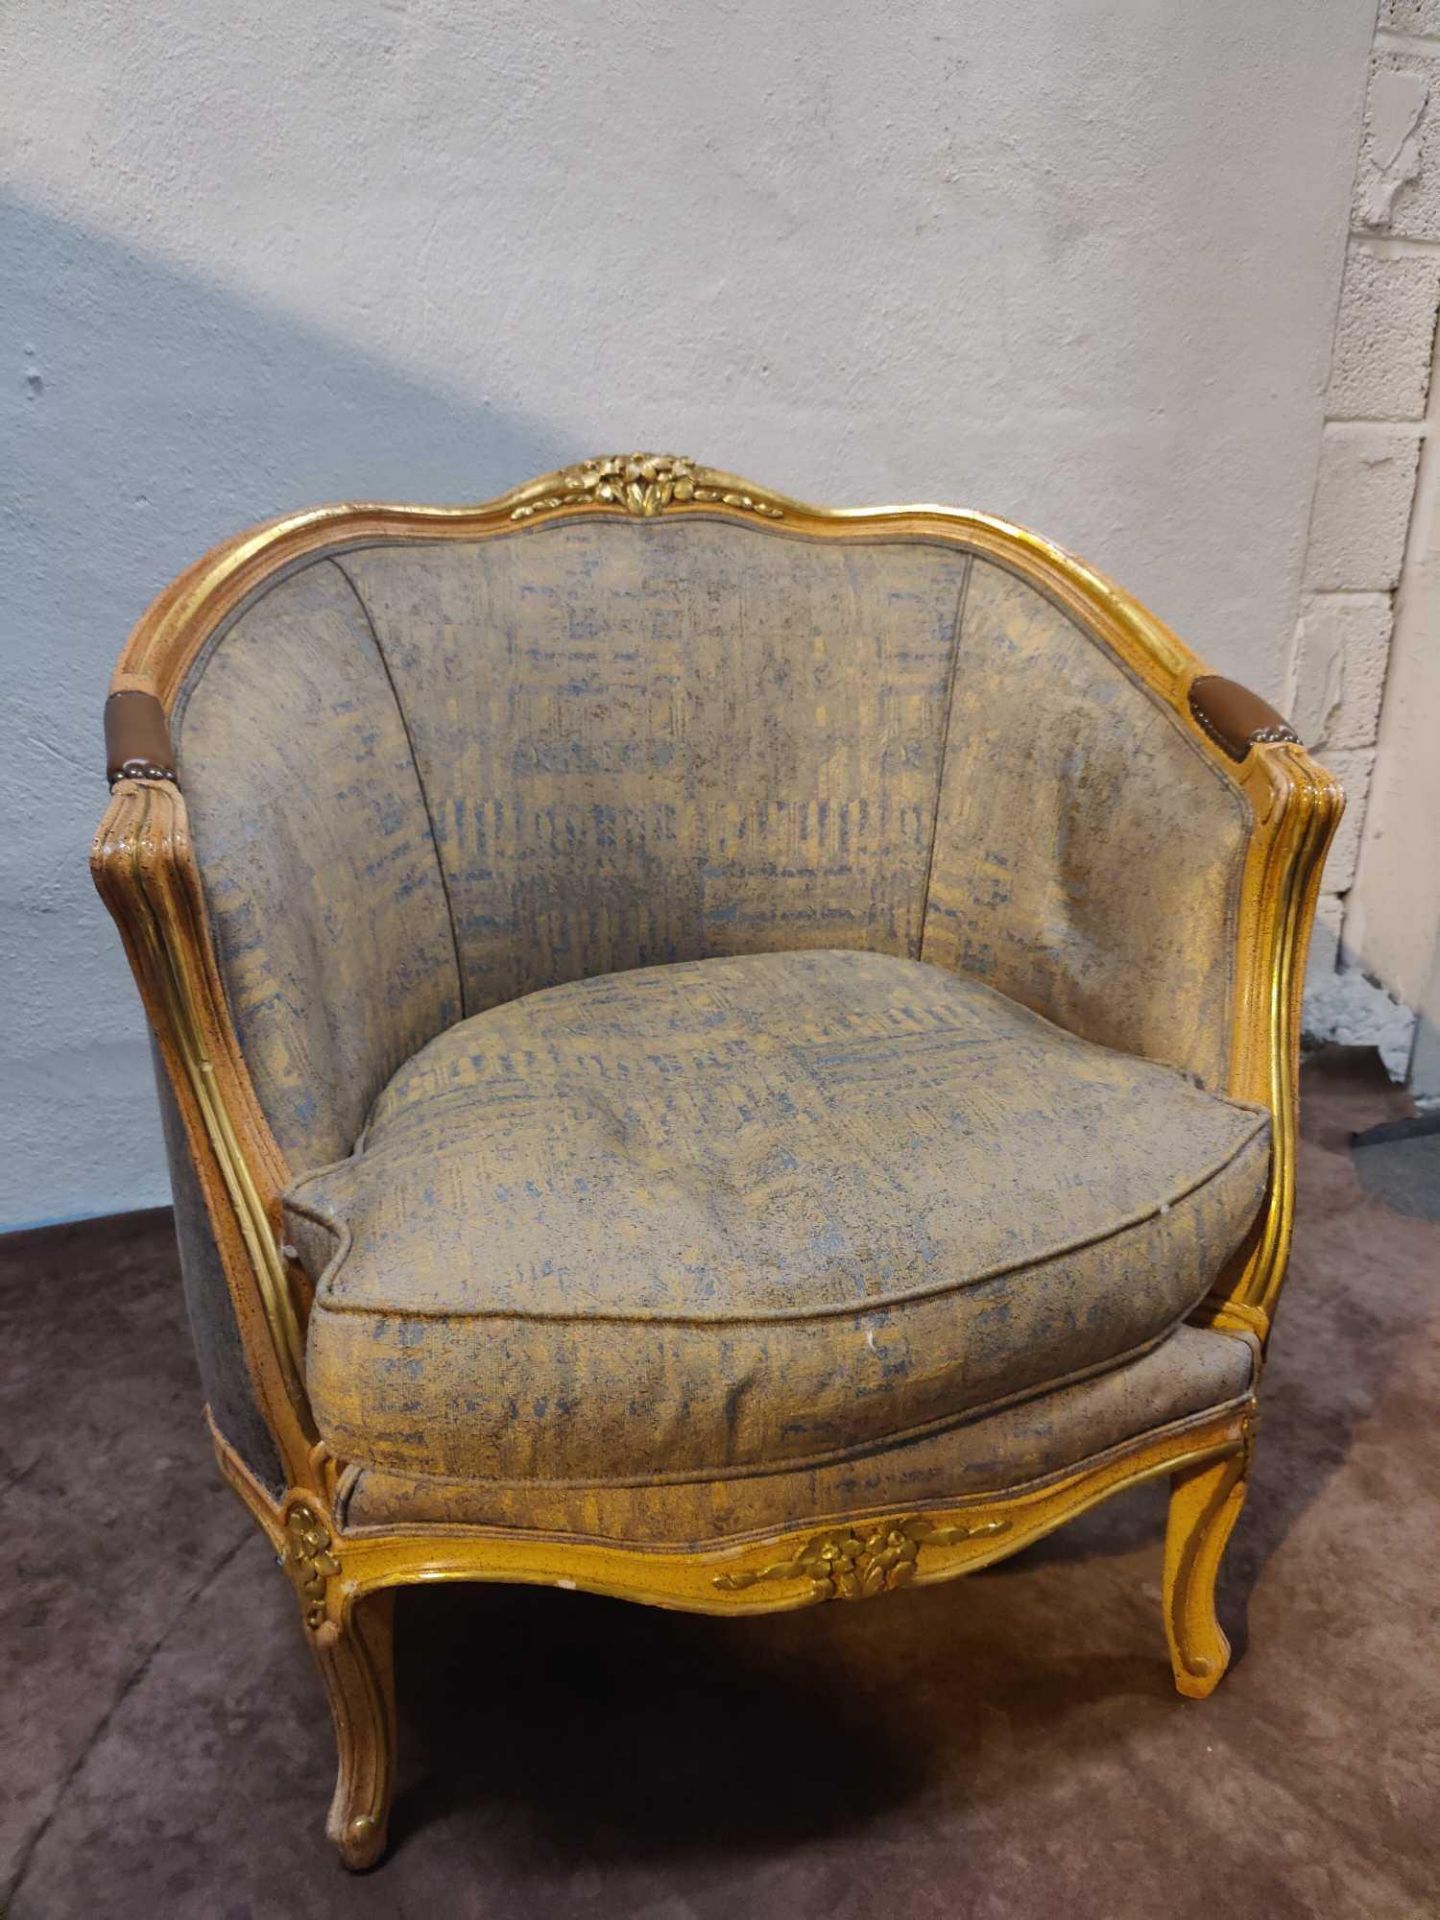 A Giltwood Framed Upholstered Bergere Chair With Carved Decorative Ornamentation To The Back Rail - Image 2 of 3